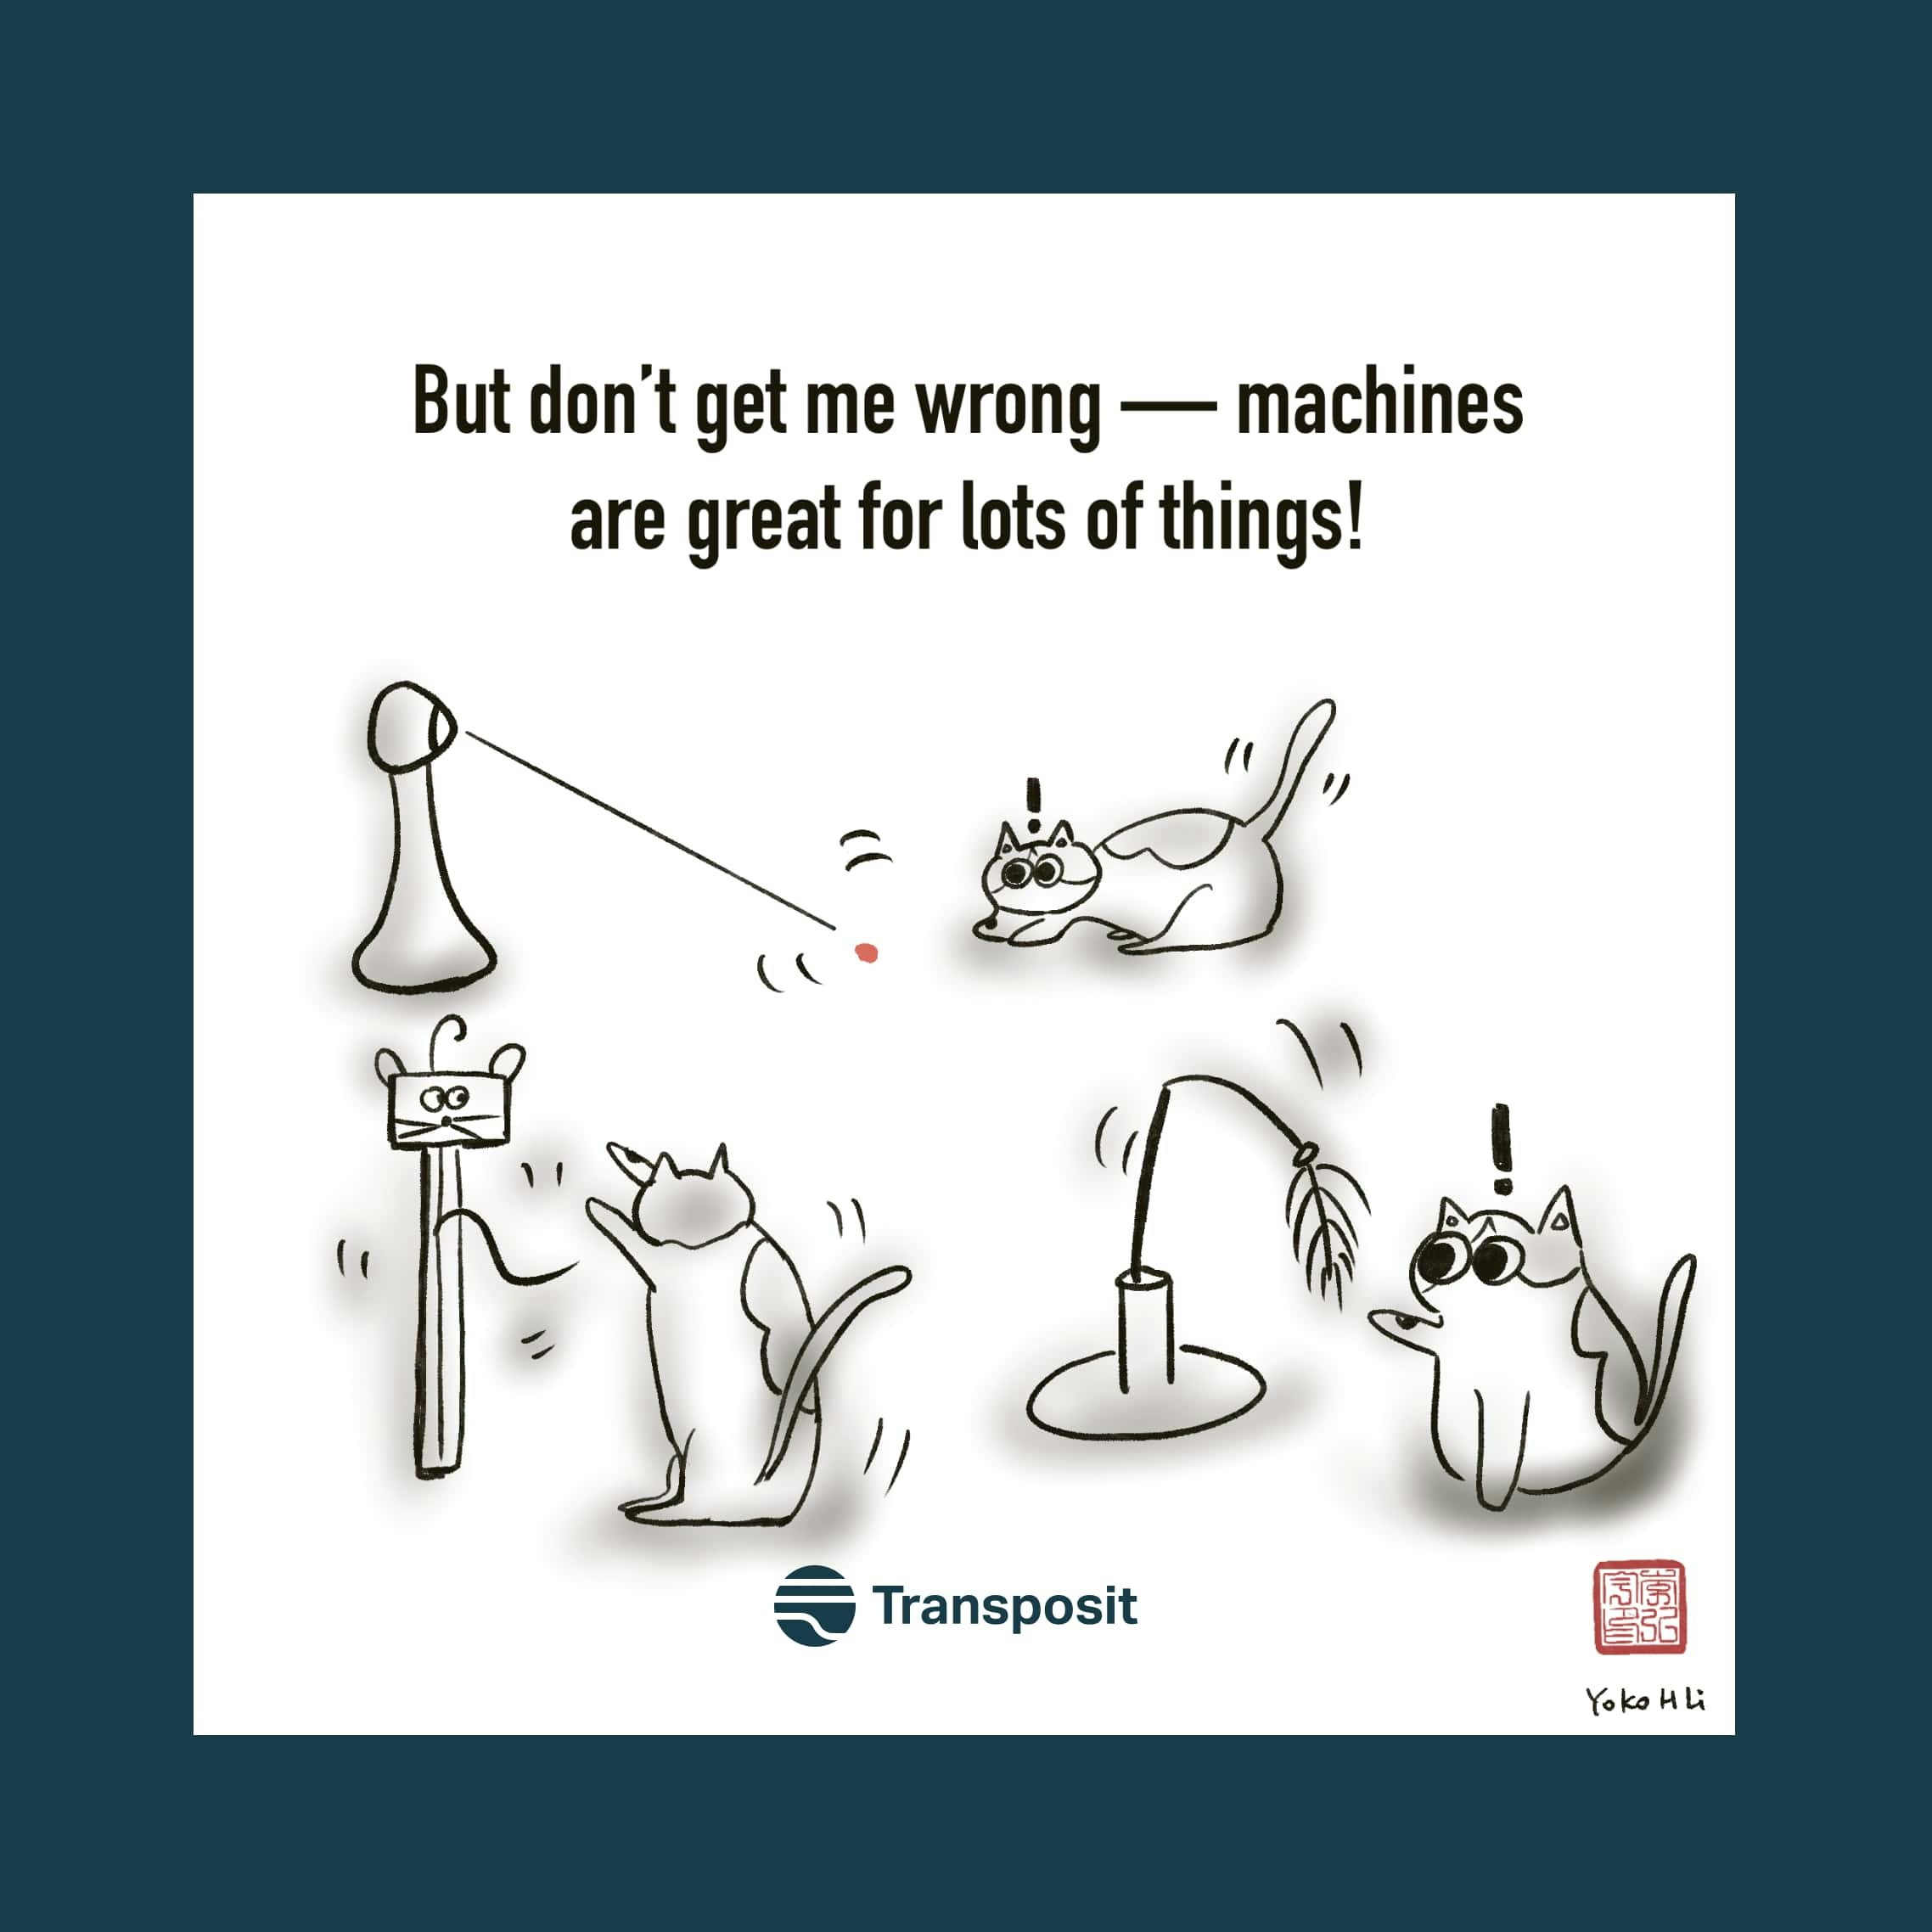 But don't get me wrong -- machines are great for lots of things! Pictures of laser pointer and other automated cat toys